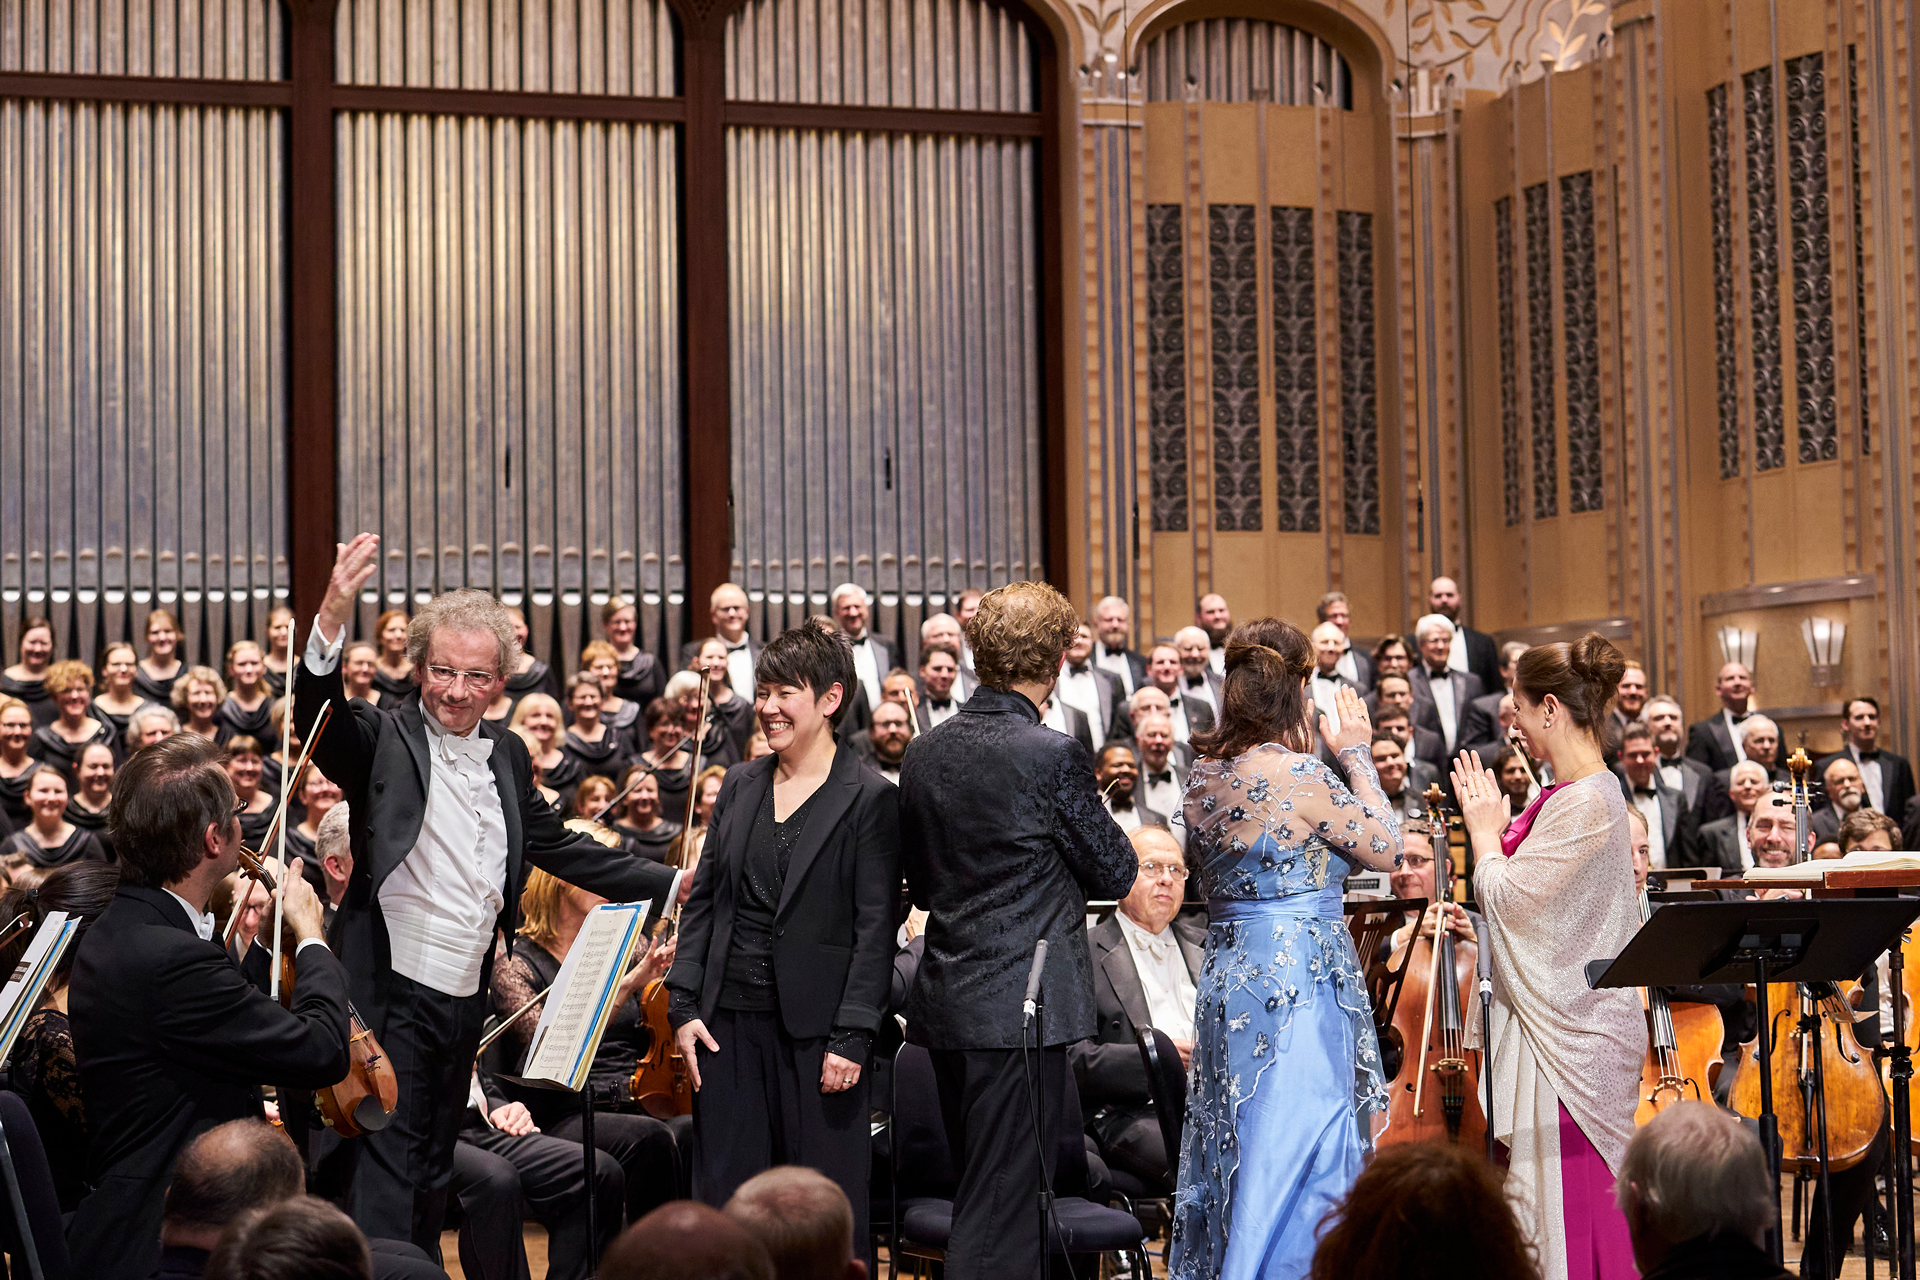 Wong joins Welser-Möst to receive applause during the March 2020 performance of Mendelssohn’s Lobgesang 